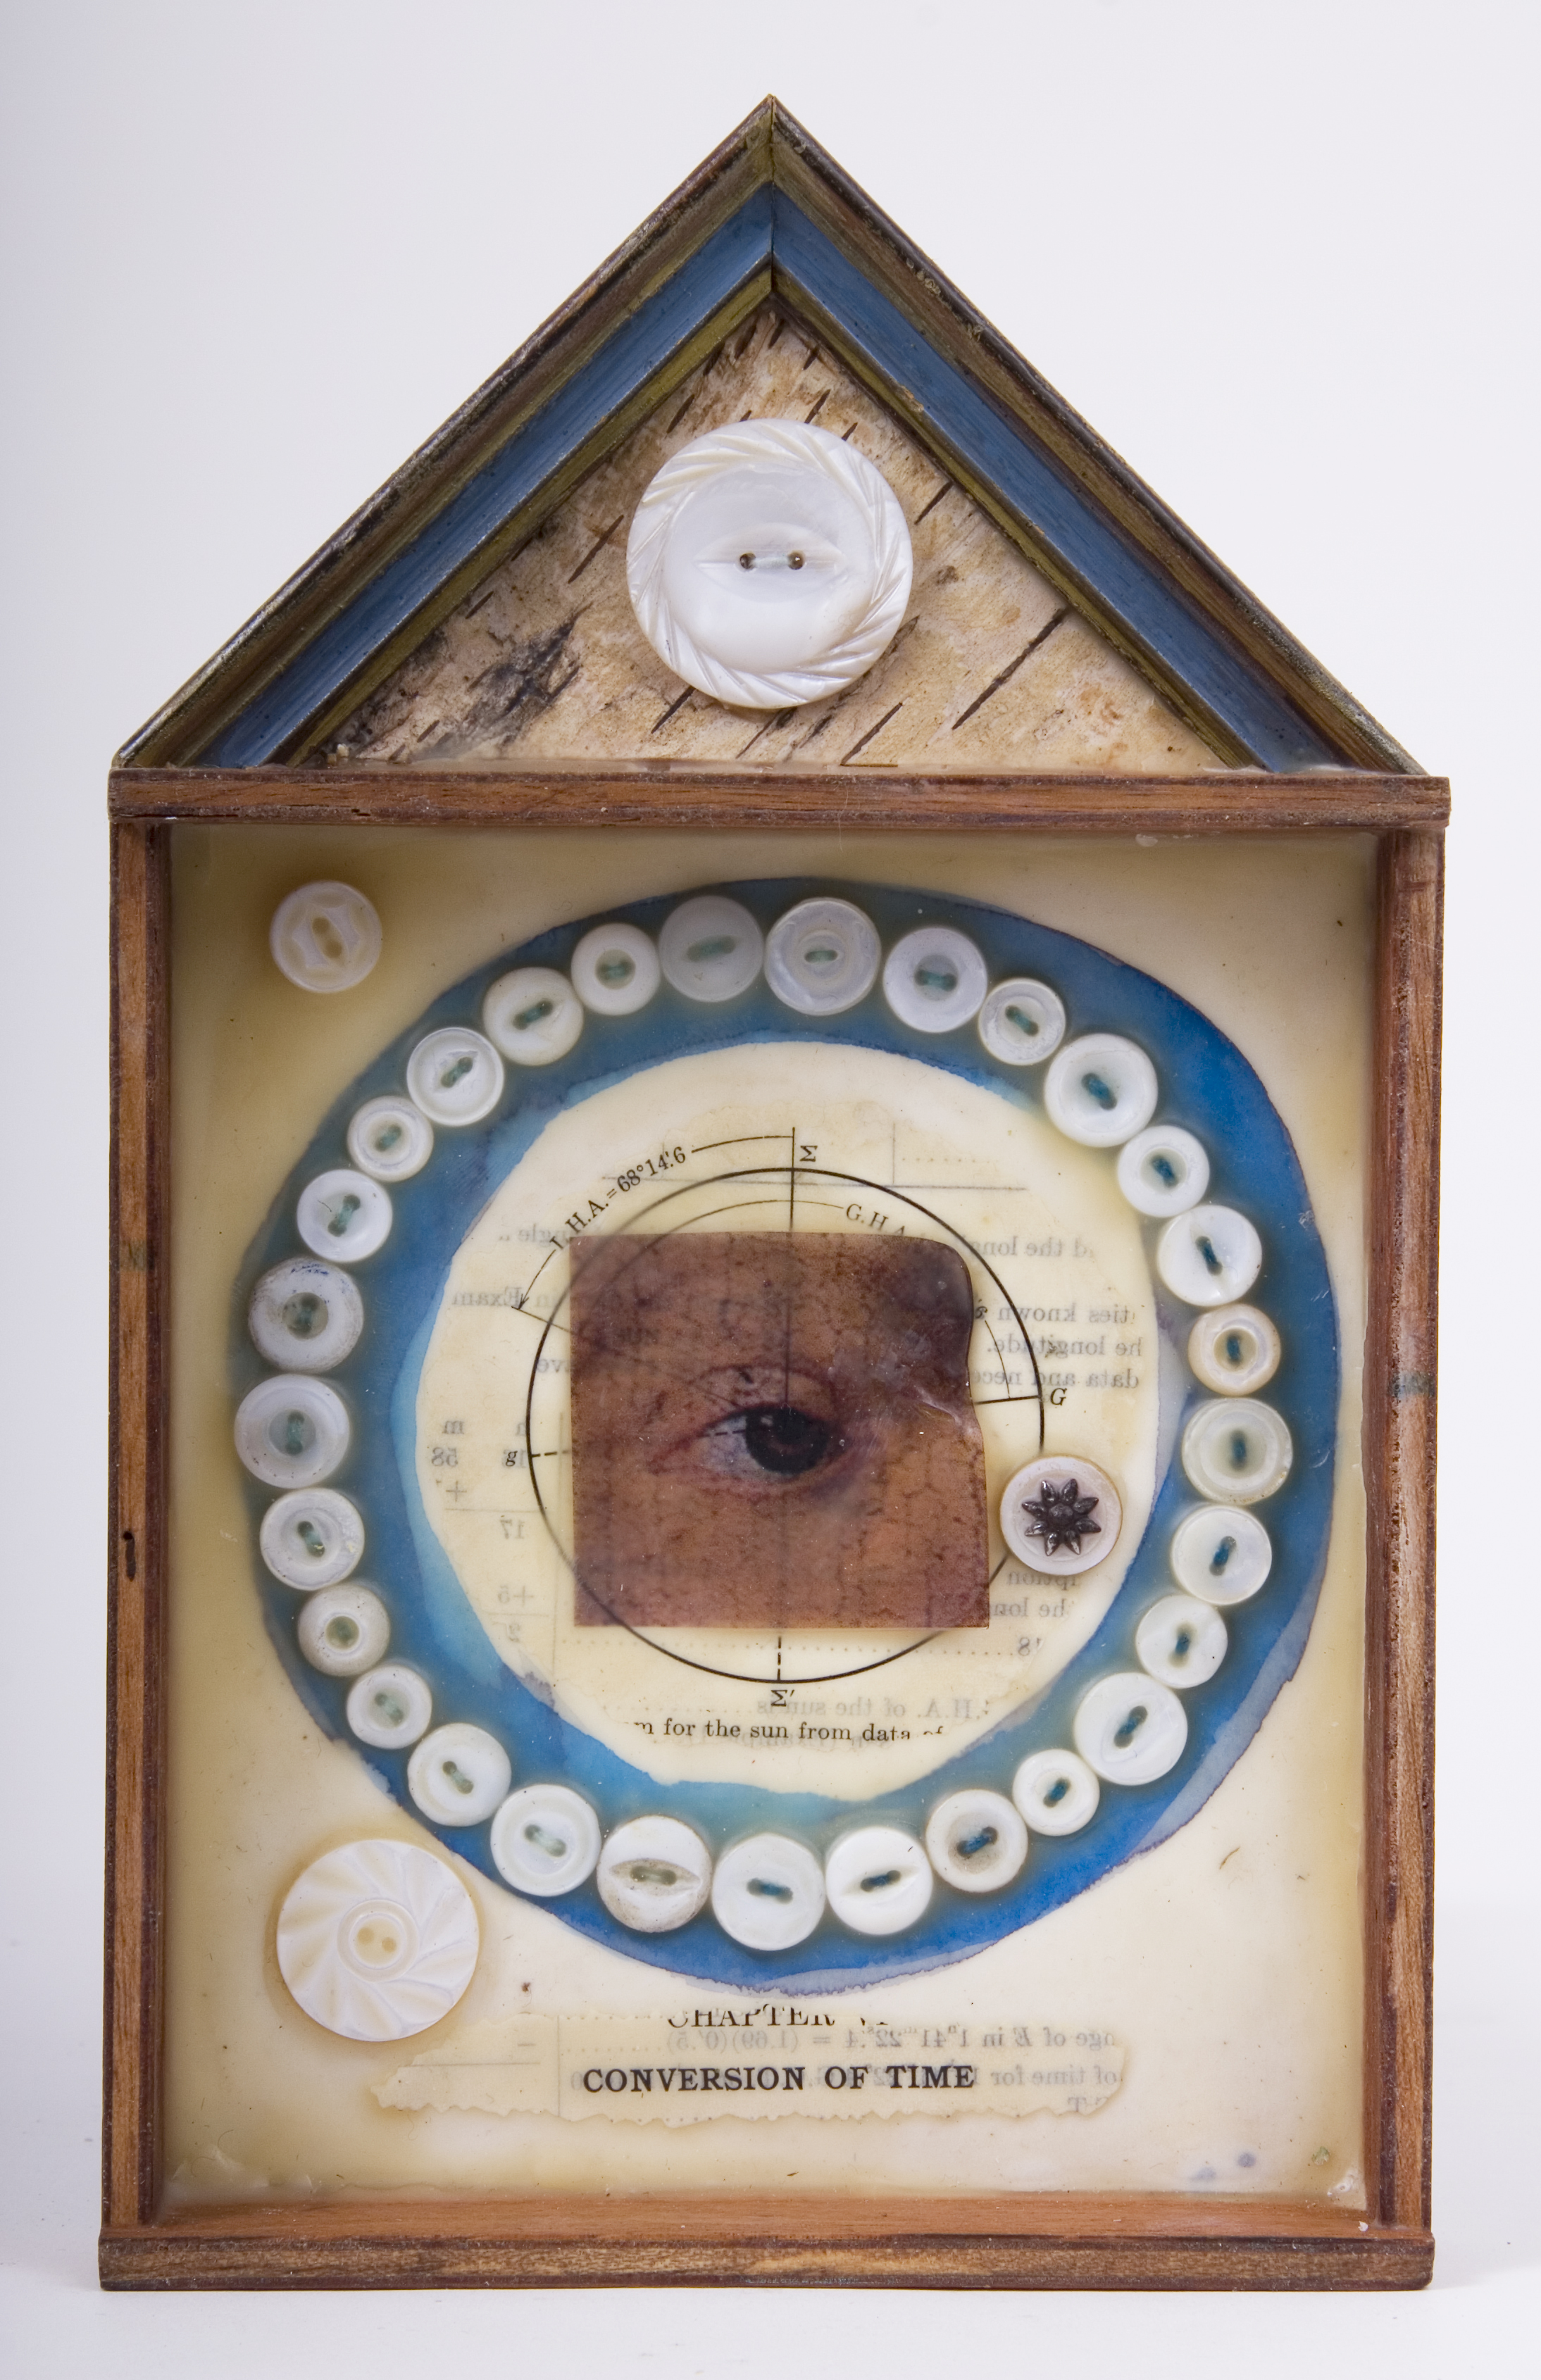 \"Conversion of Time\"
mixed-media assemblage
9 x 5.5 x 1.25
2009
$75.00
Cigar box, frame sample, birch bark, mother of pearl buttons, transparency, ink, wax, astronomy text on watercolor paper